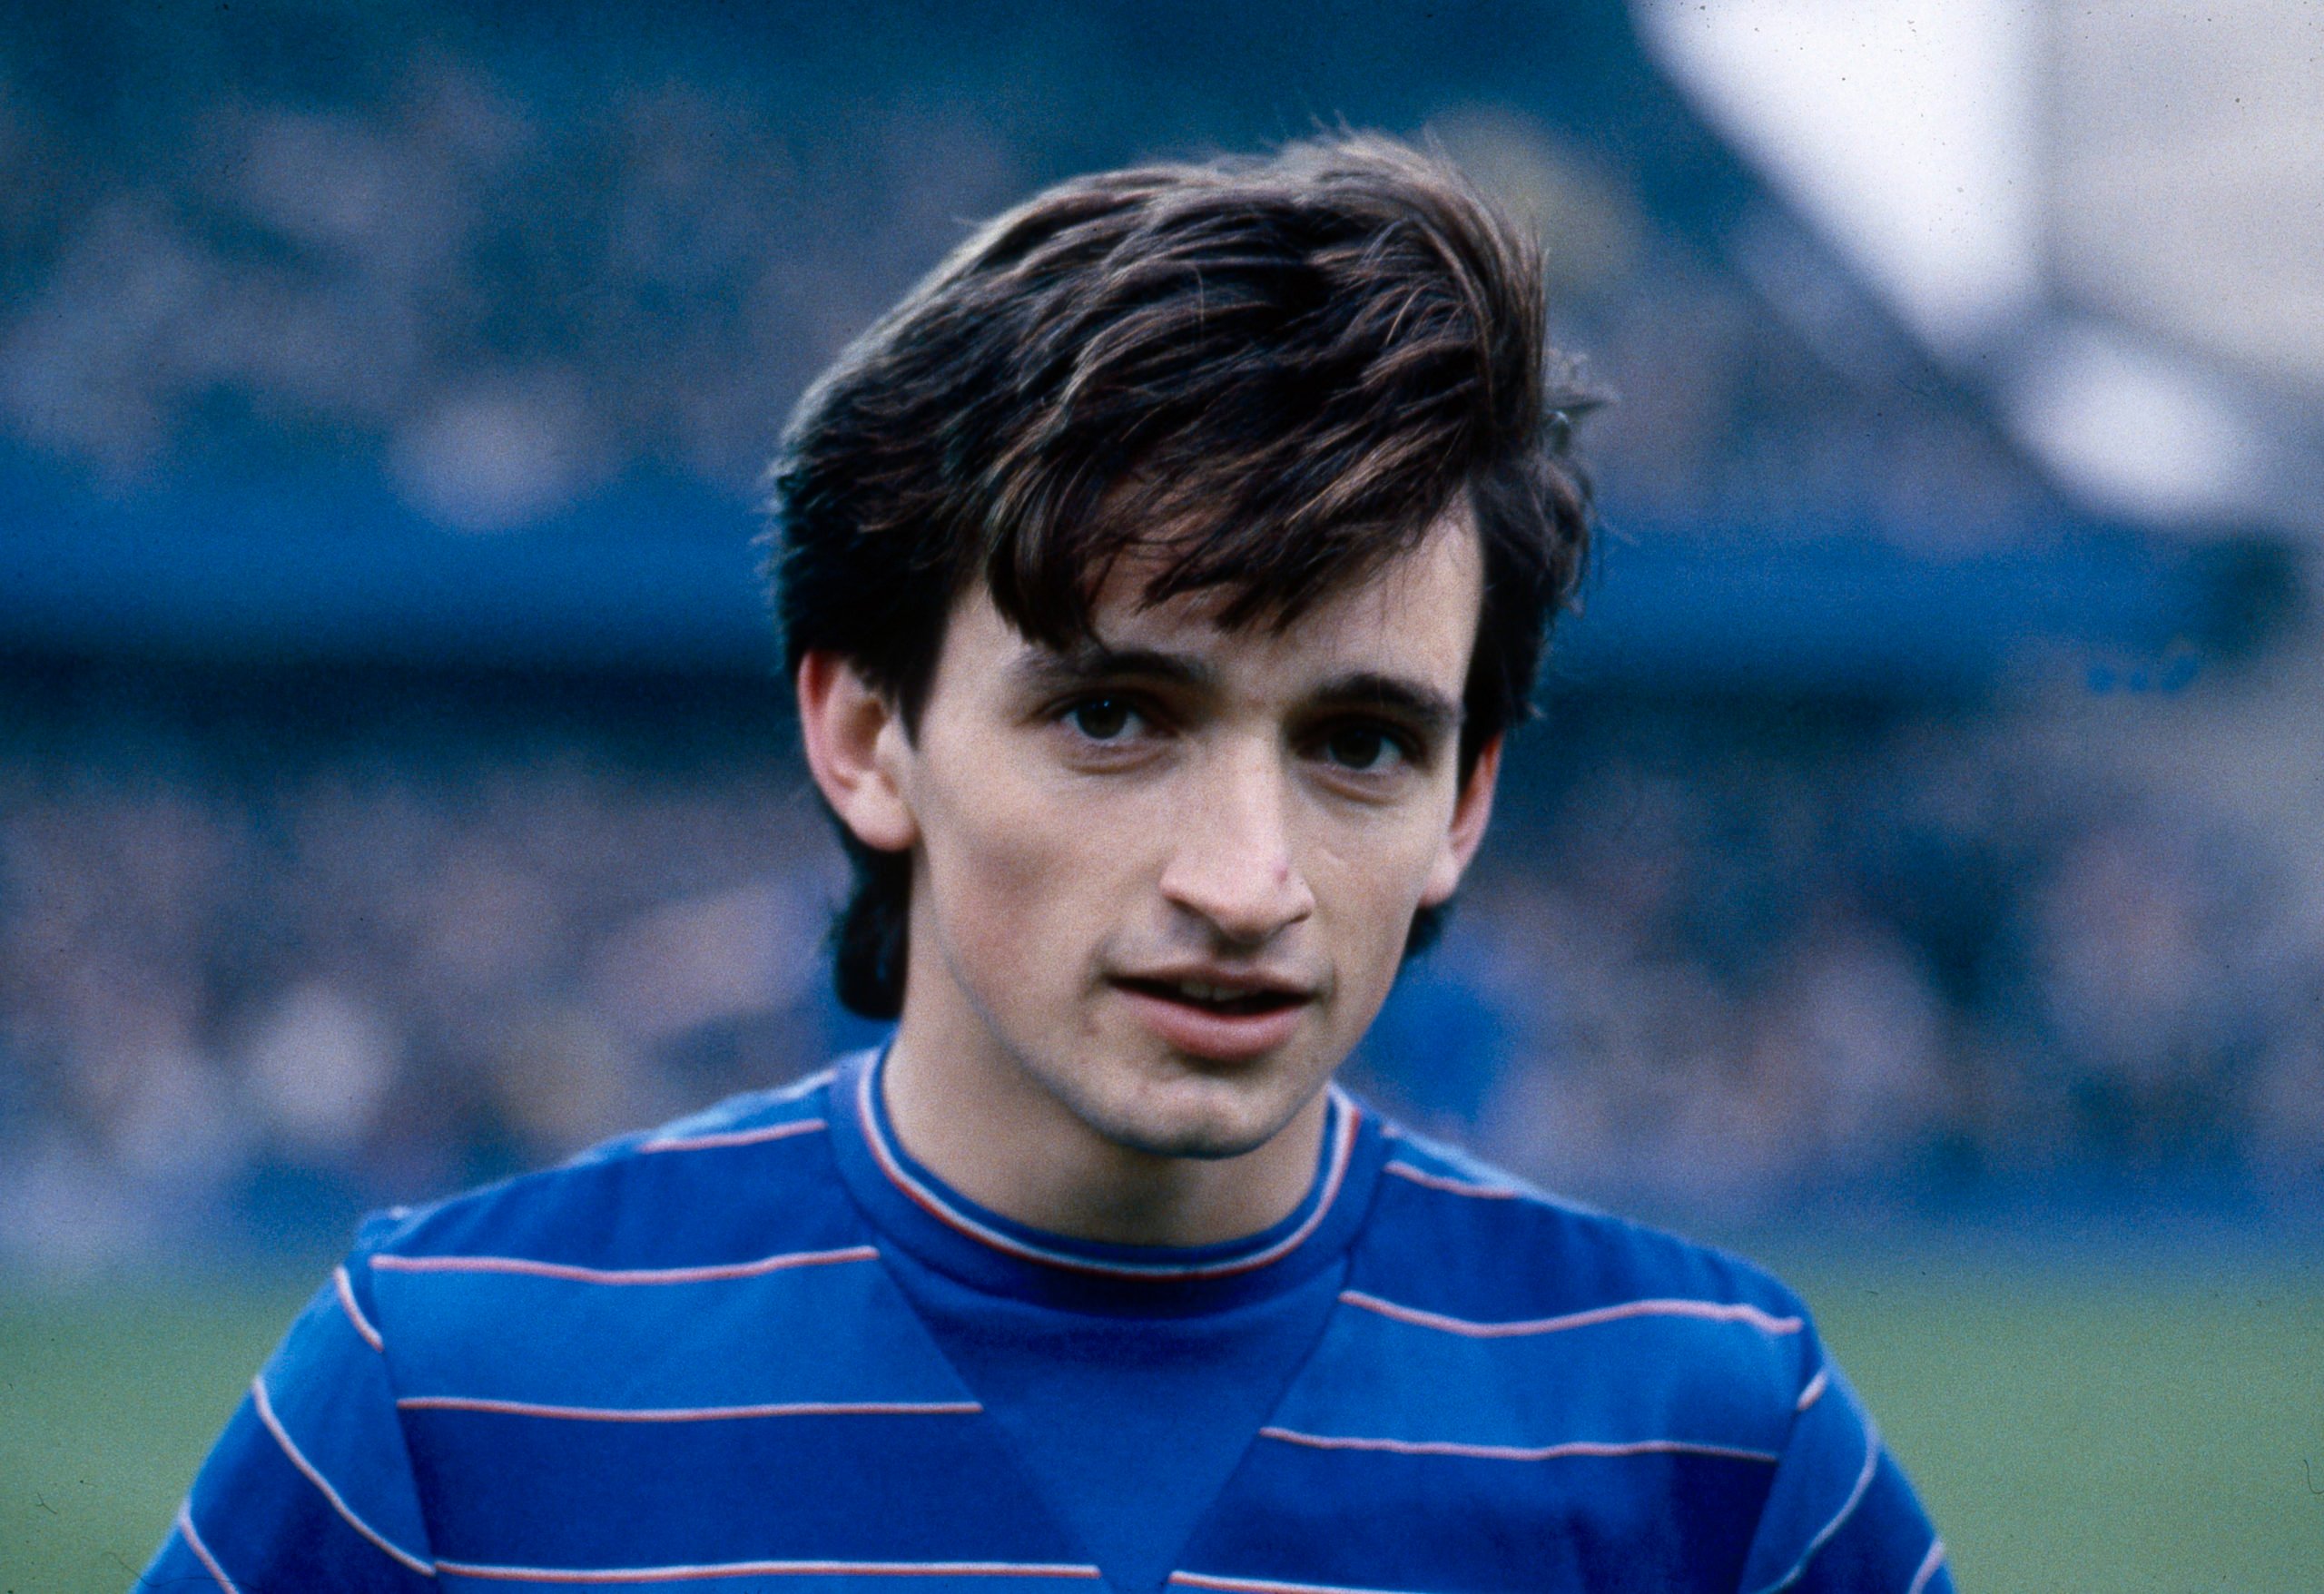 Exclusive: Chelsea legend Pat Nevin on Lampard and Benitez amid Celtic links